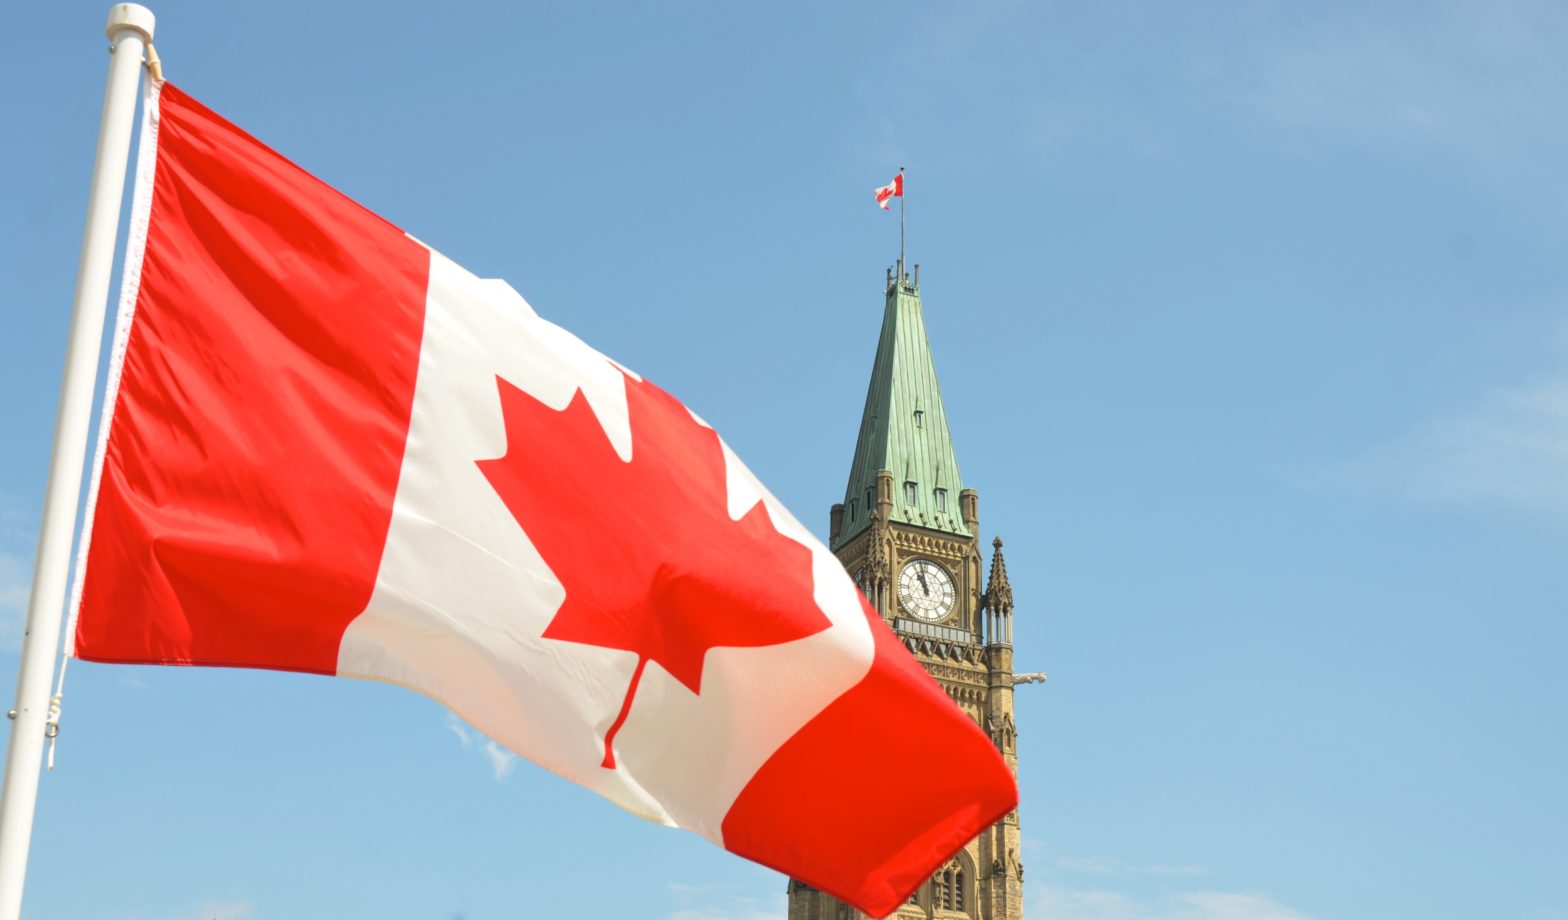 A photo of the Canadian flag in front of the Canadian parliament building